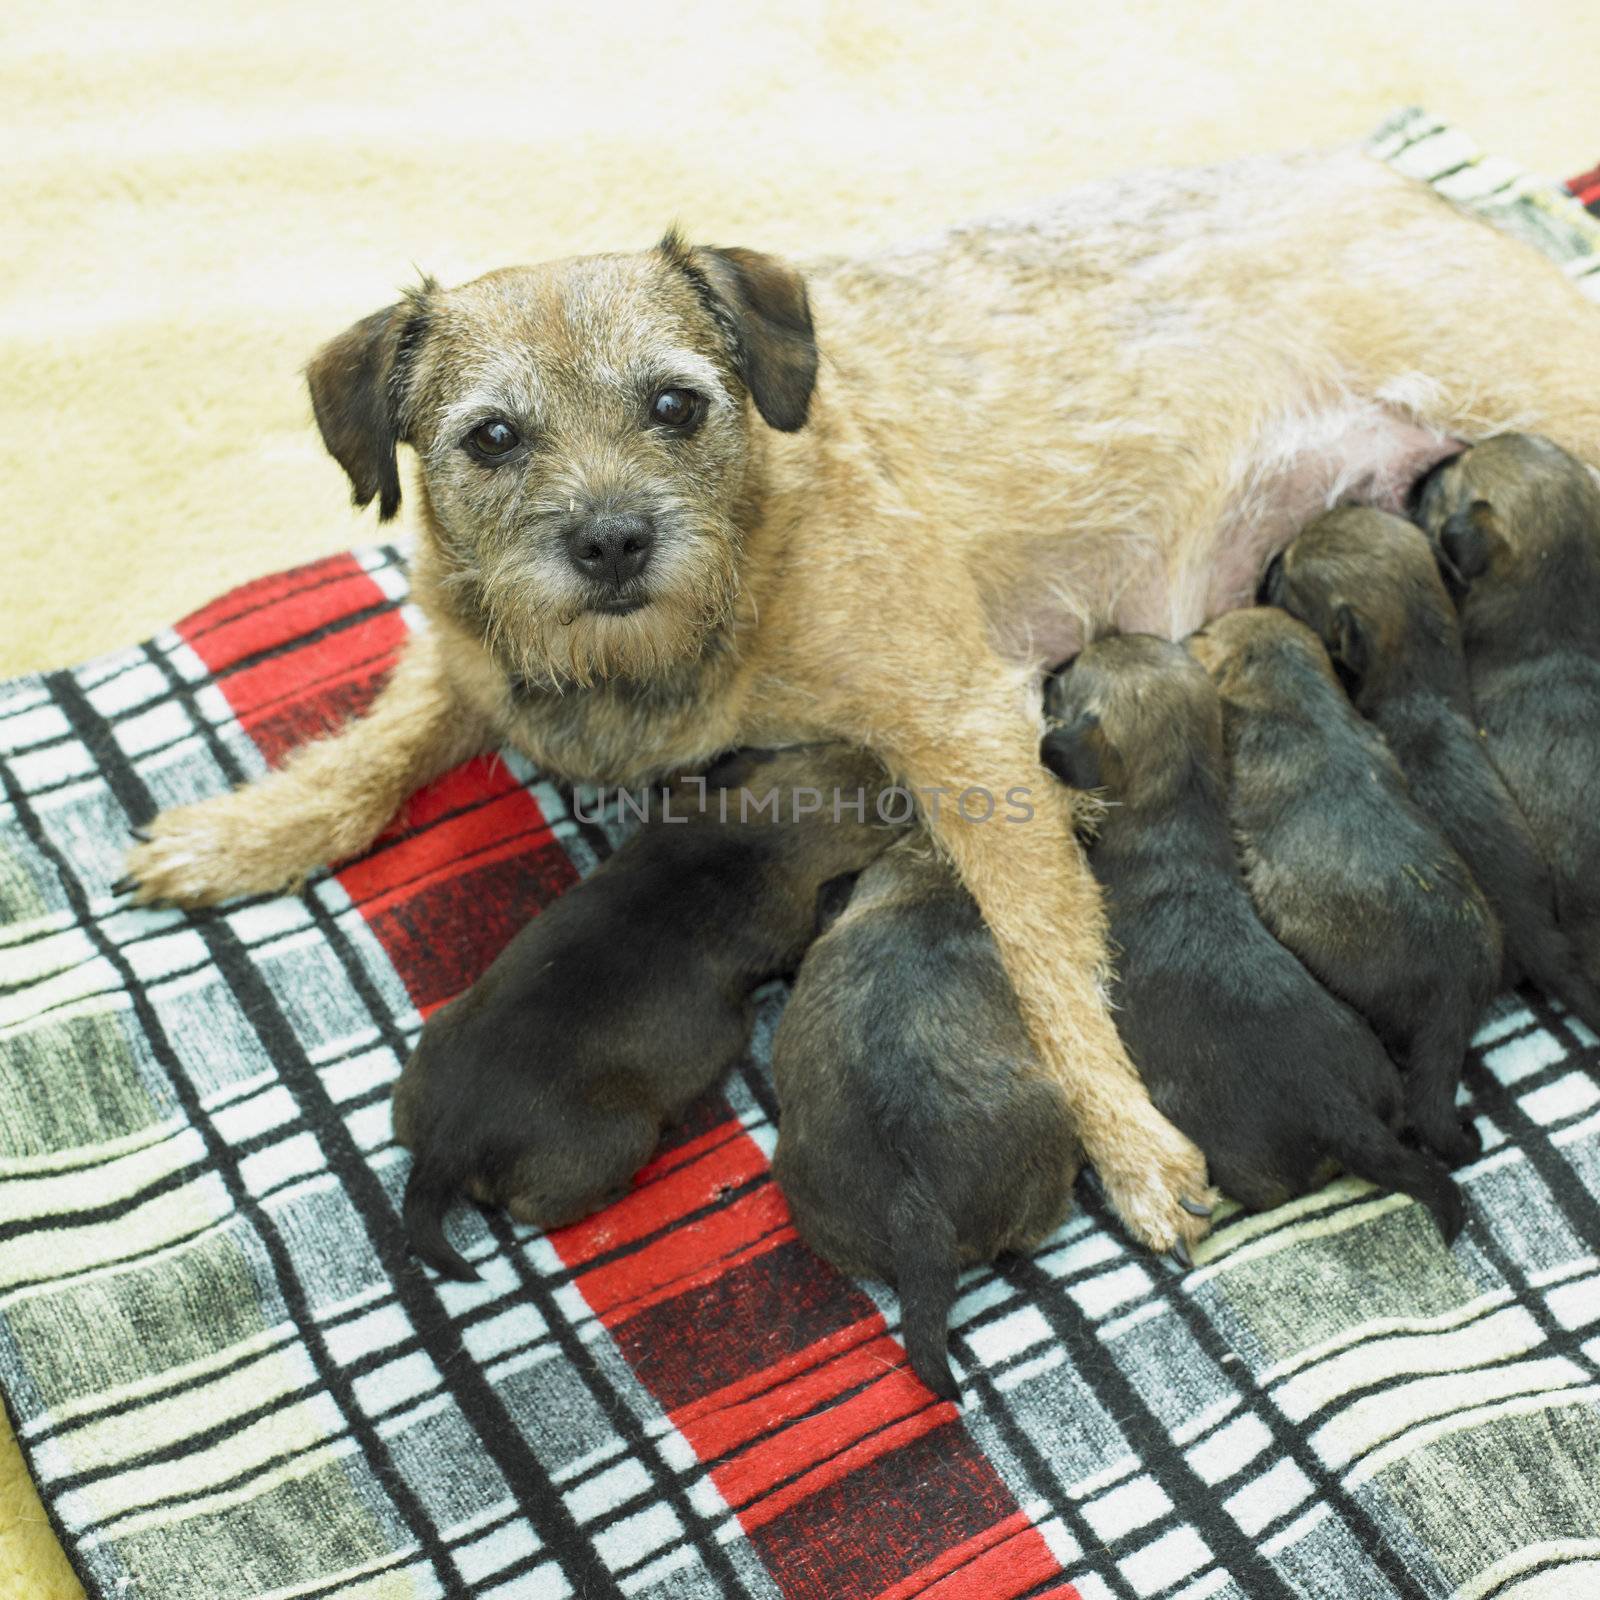 female dog with puppies (Border Terrier) by phbcz